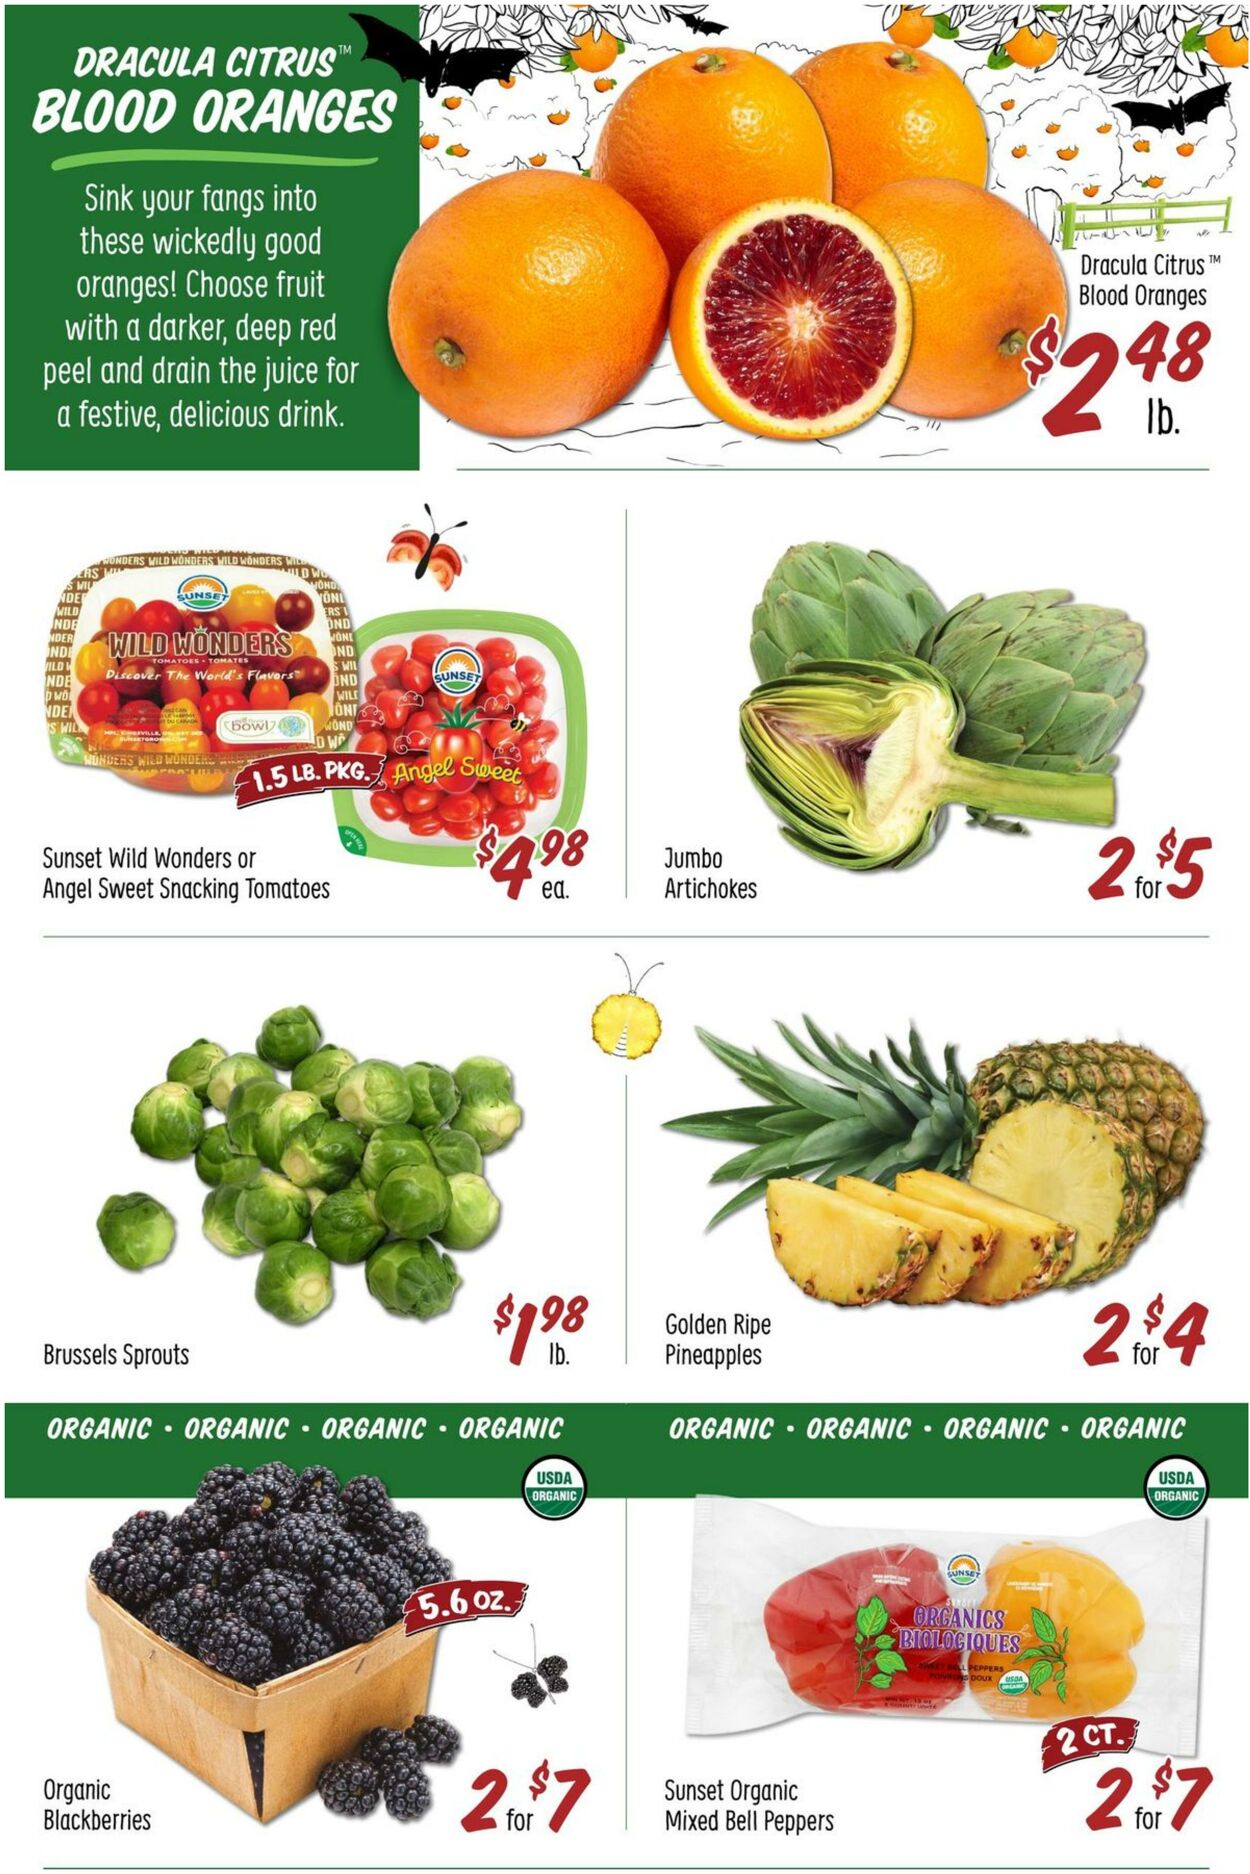 Weekly ad Sprouts 10/19/2022 - 10/25/2022